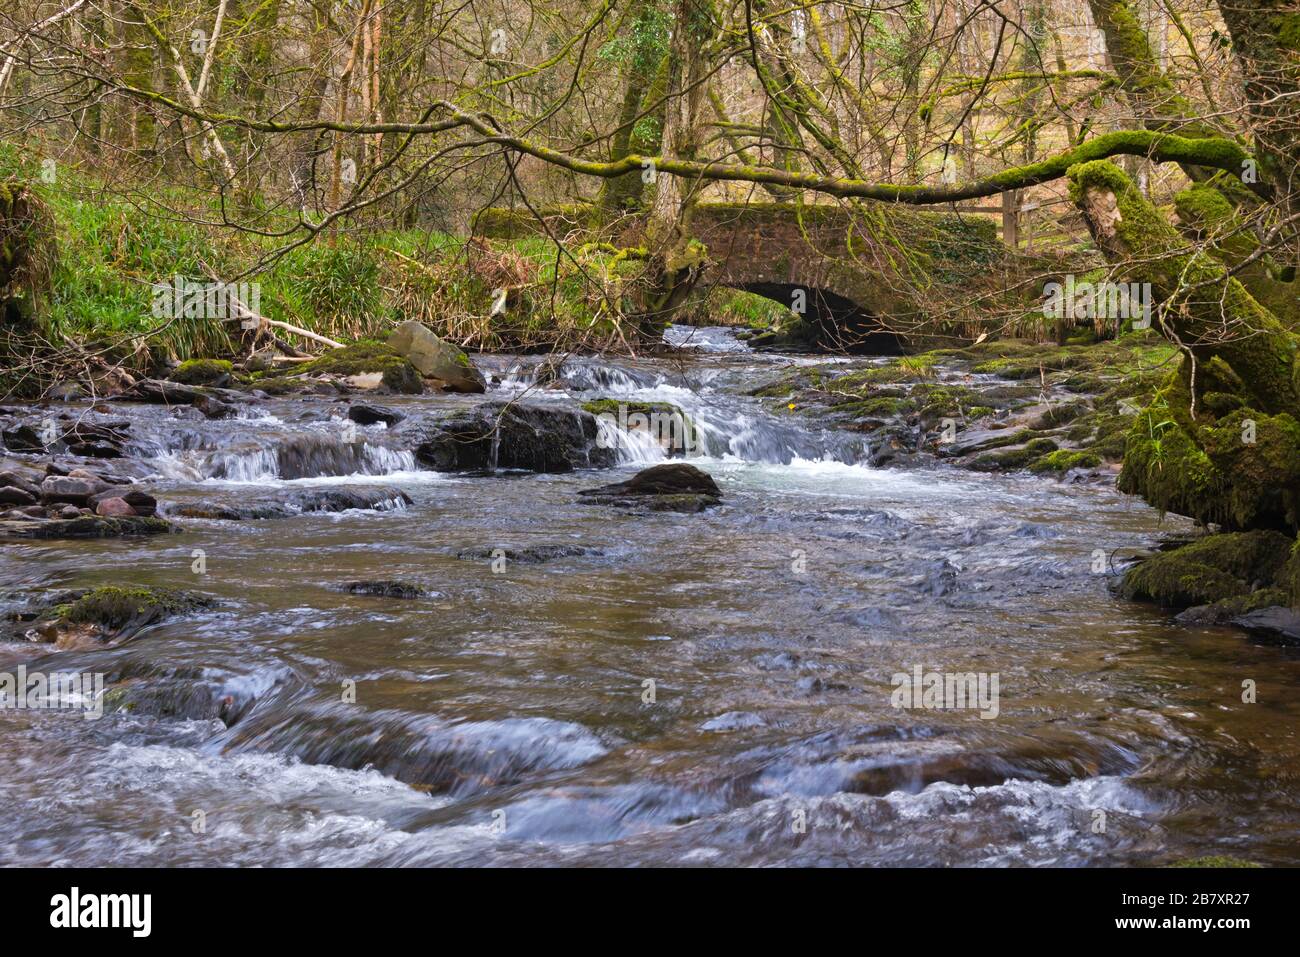 the meeting of Dane Brook and River Barle at Castle Bridge on the Exe Valley Way just west of Dulverton in the Exmoor National Park, England, UK Stock Photo